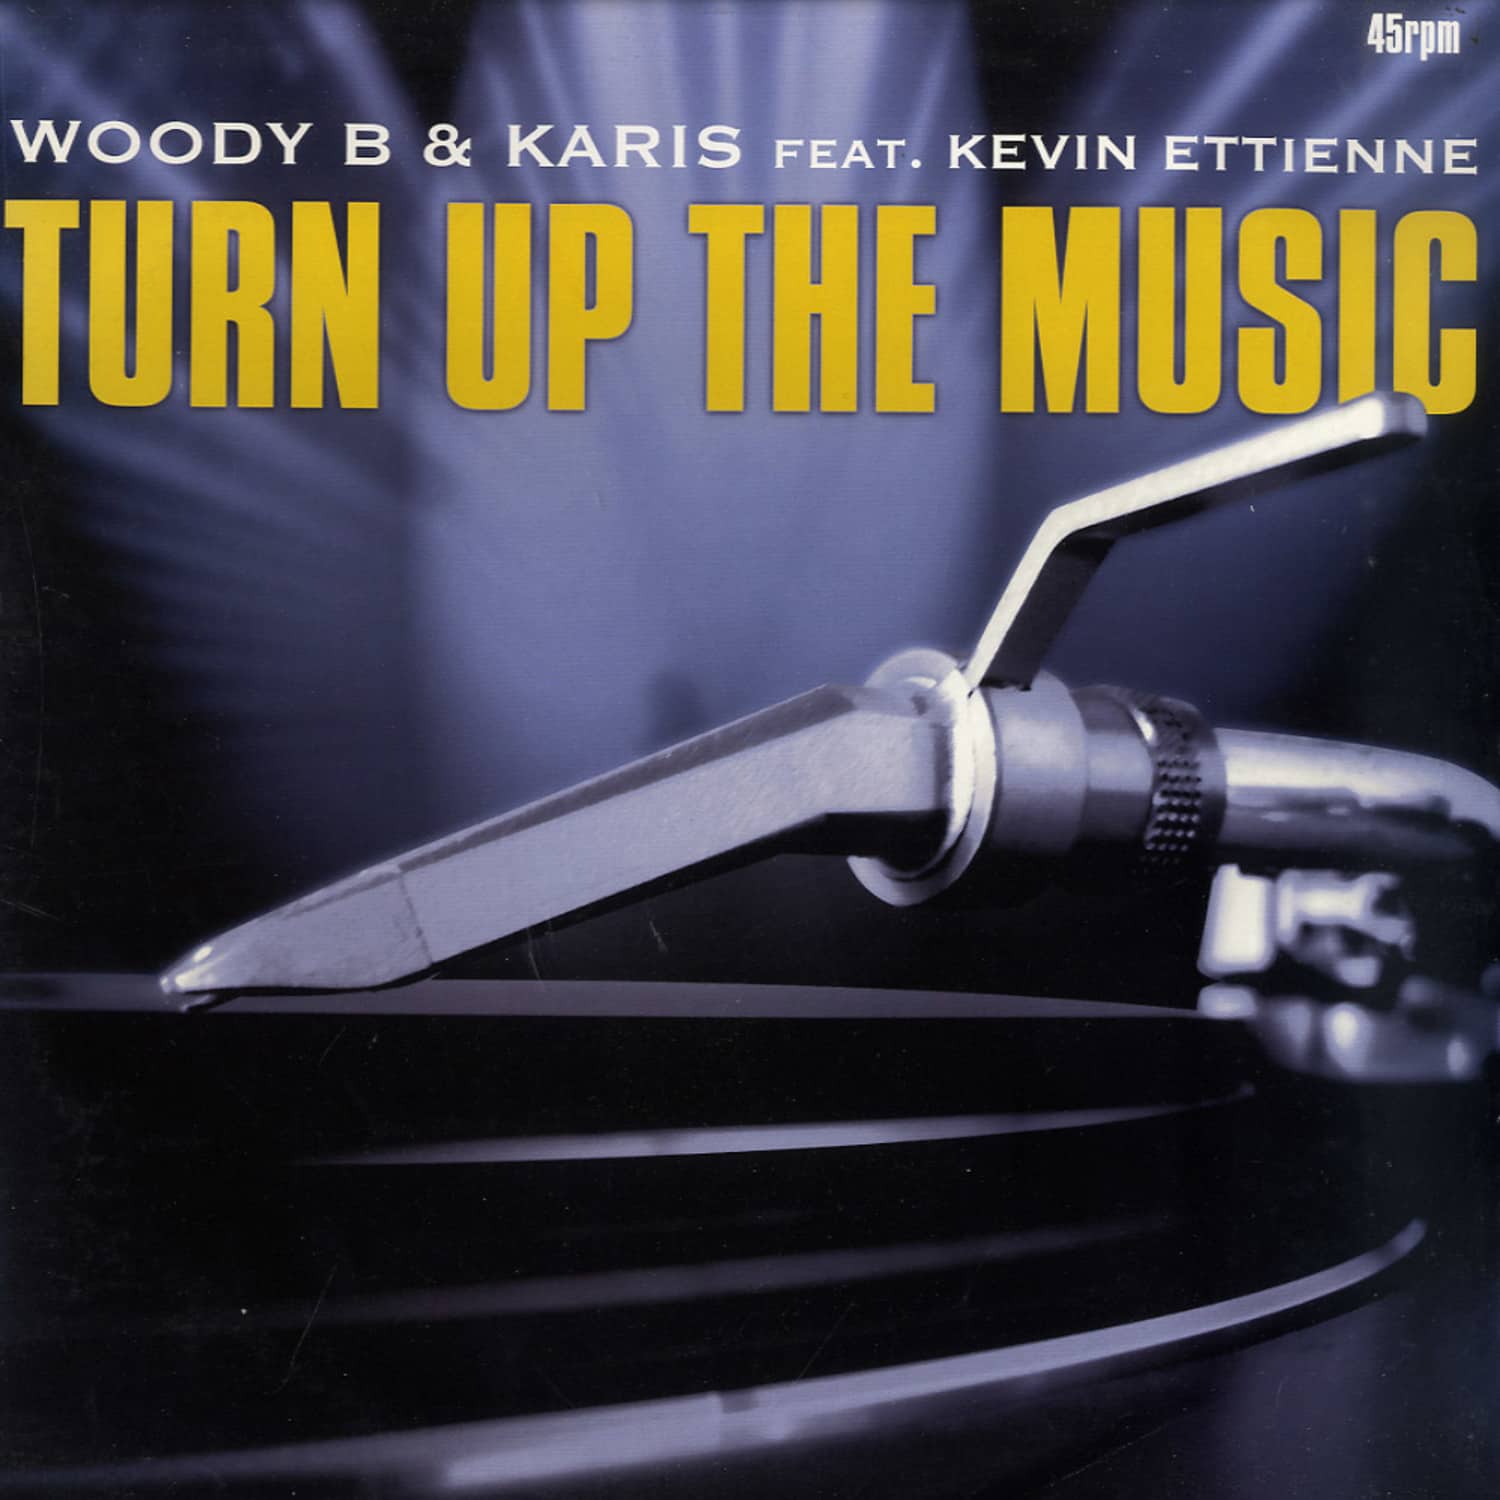 Woody B & Karis feat Kevin Ettienne - TURN UP THE MUSIC